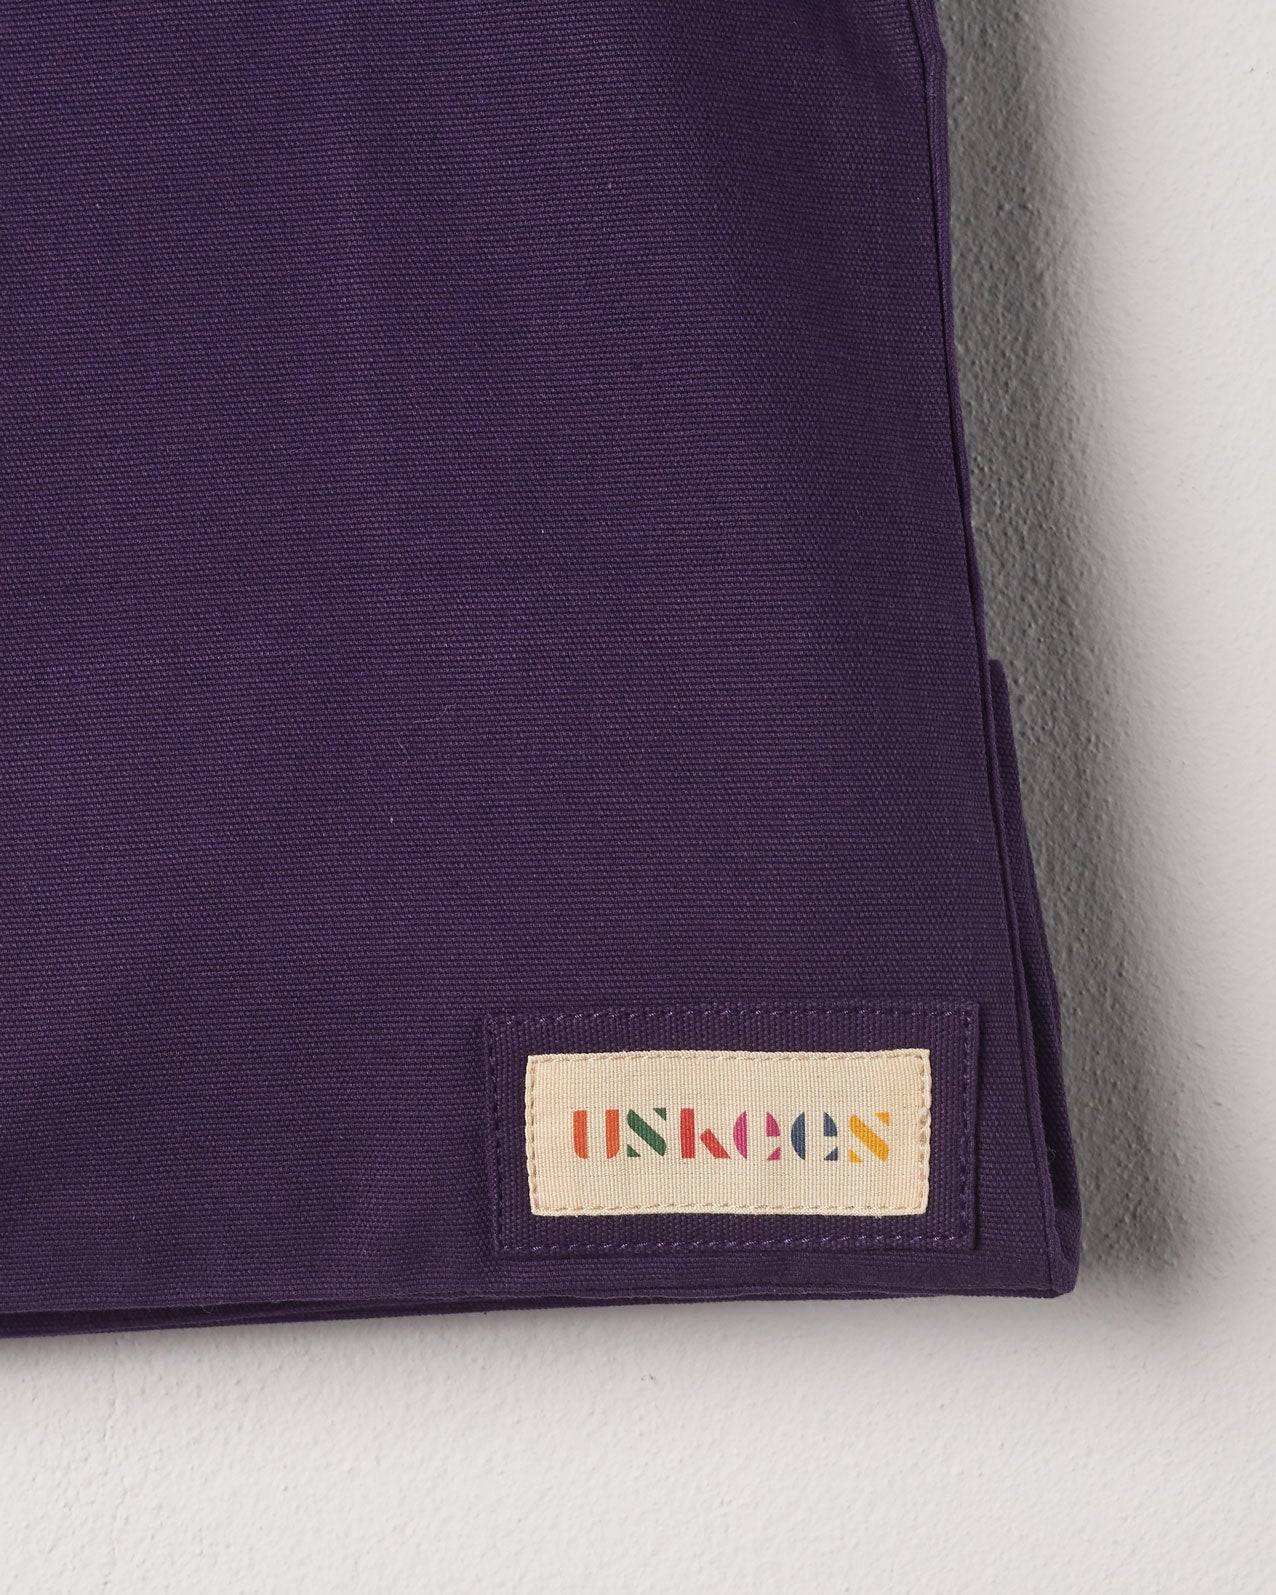 Close-up view of Uskees #4001 large tote bag in purple showing the Uskees woven label.